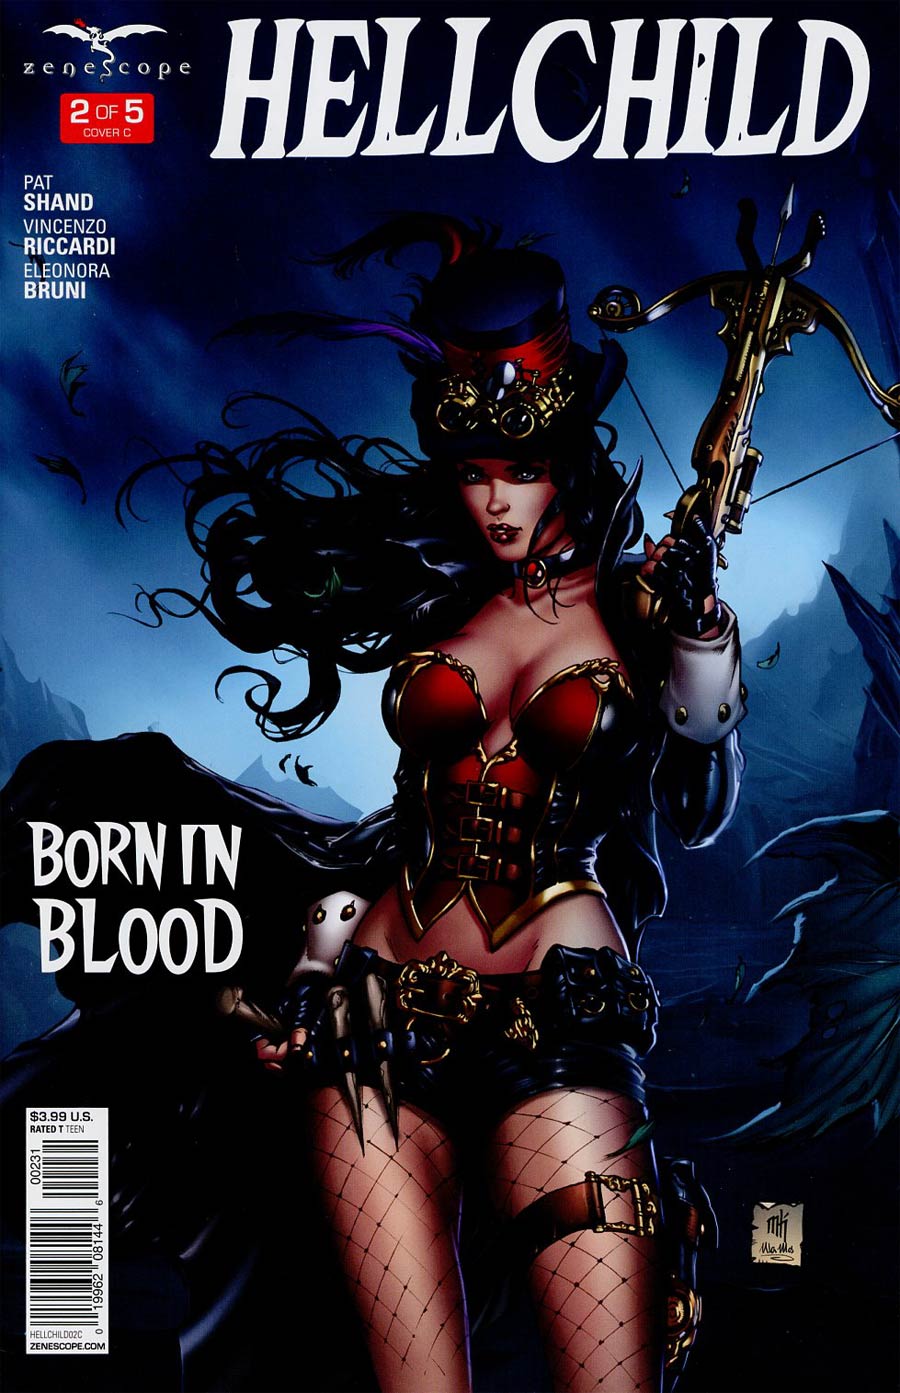 Grimm Fairy Tales Presents Hellchild #2 Cover C Mike Krome